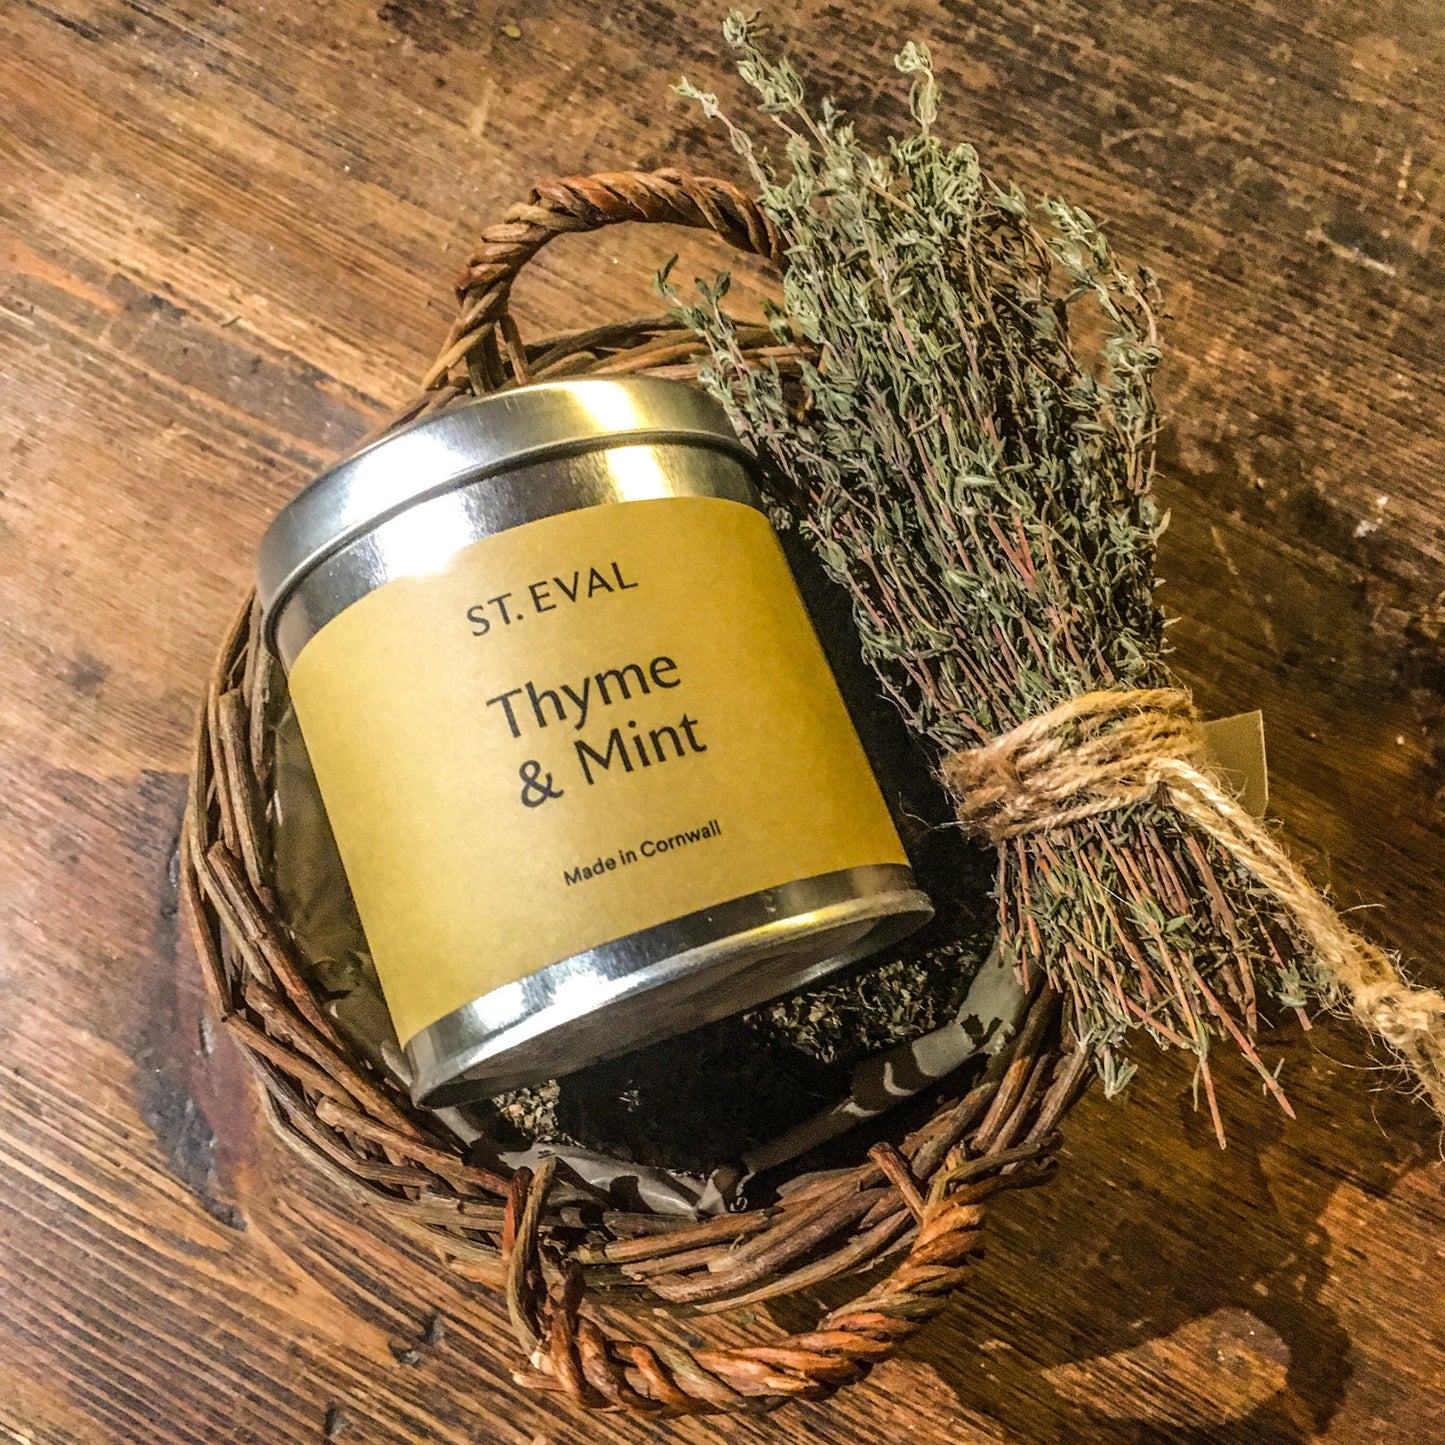 A thyme and mint candle tin placed in a basket of dried mint next to a bundle of thyme sprigs tied with brown string